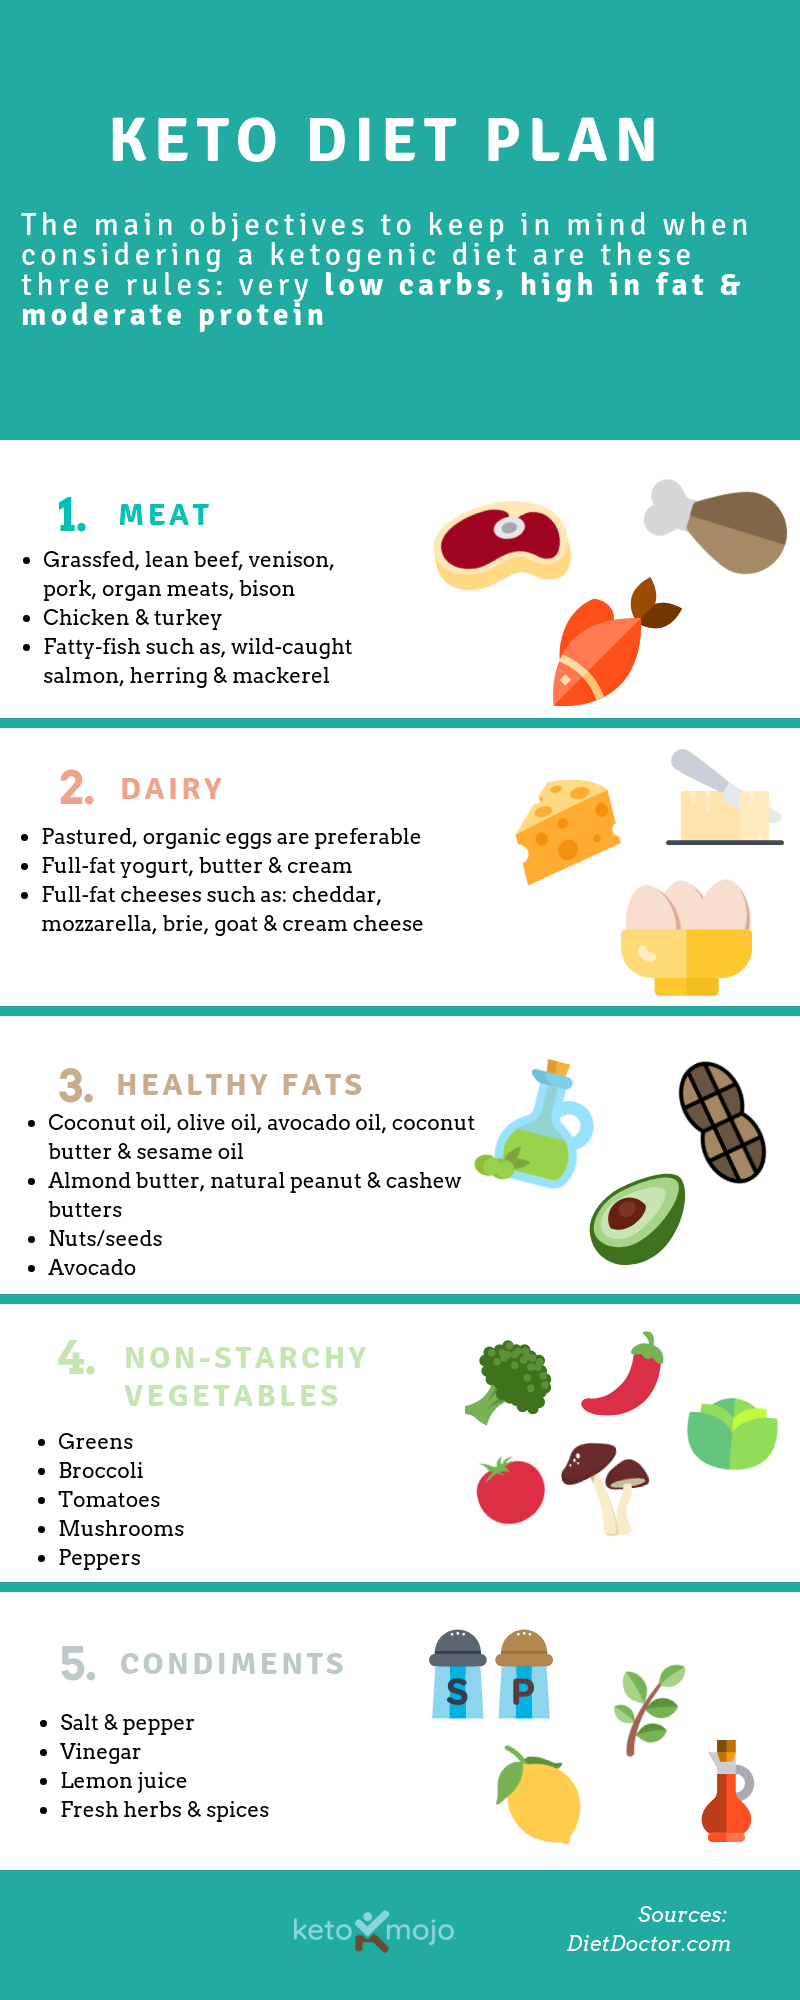 Low Carb & Keto Diet Plan: How To Start A Low Carb Diet